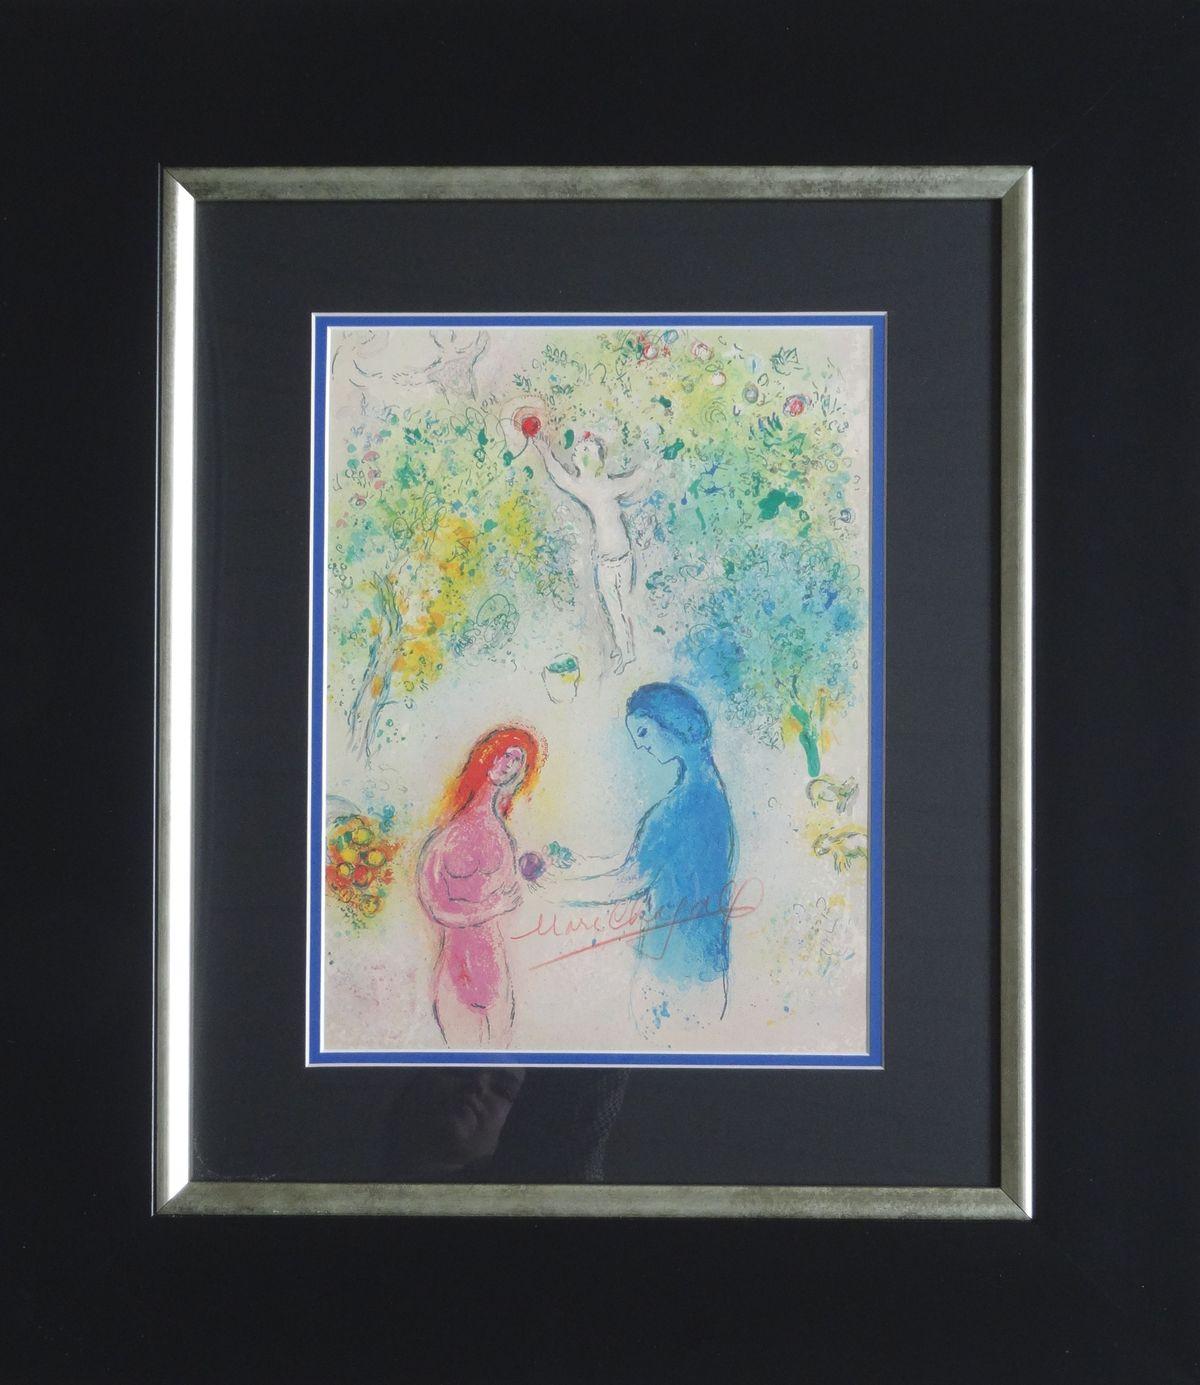 Daphnis and Chloe Suite. 1977, lithography, 33x25 cm  - Print by Marc Chagall